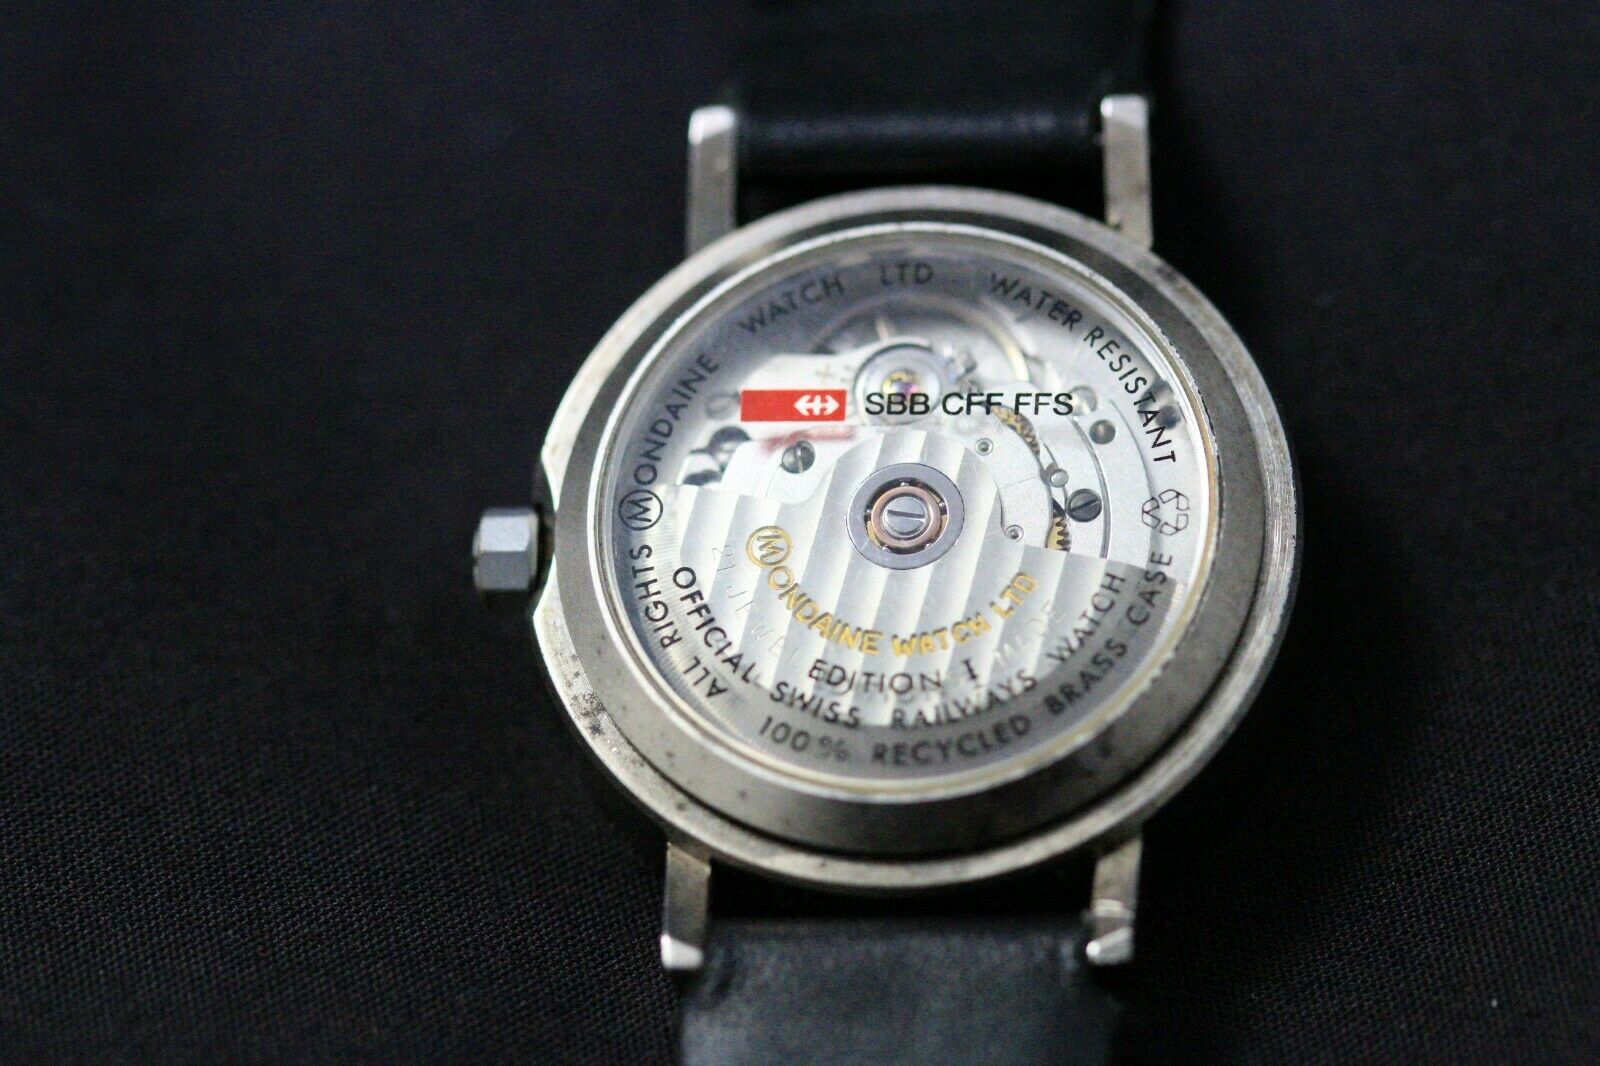 VINTAGE SBB CFF FFS MONDAINE ECOMATIC AUTOMATIC STAINLESS STEEL 